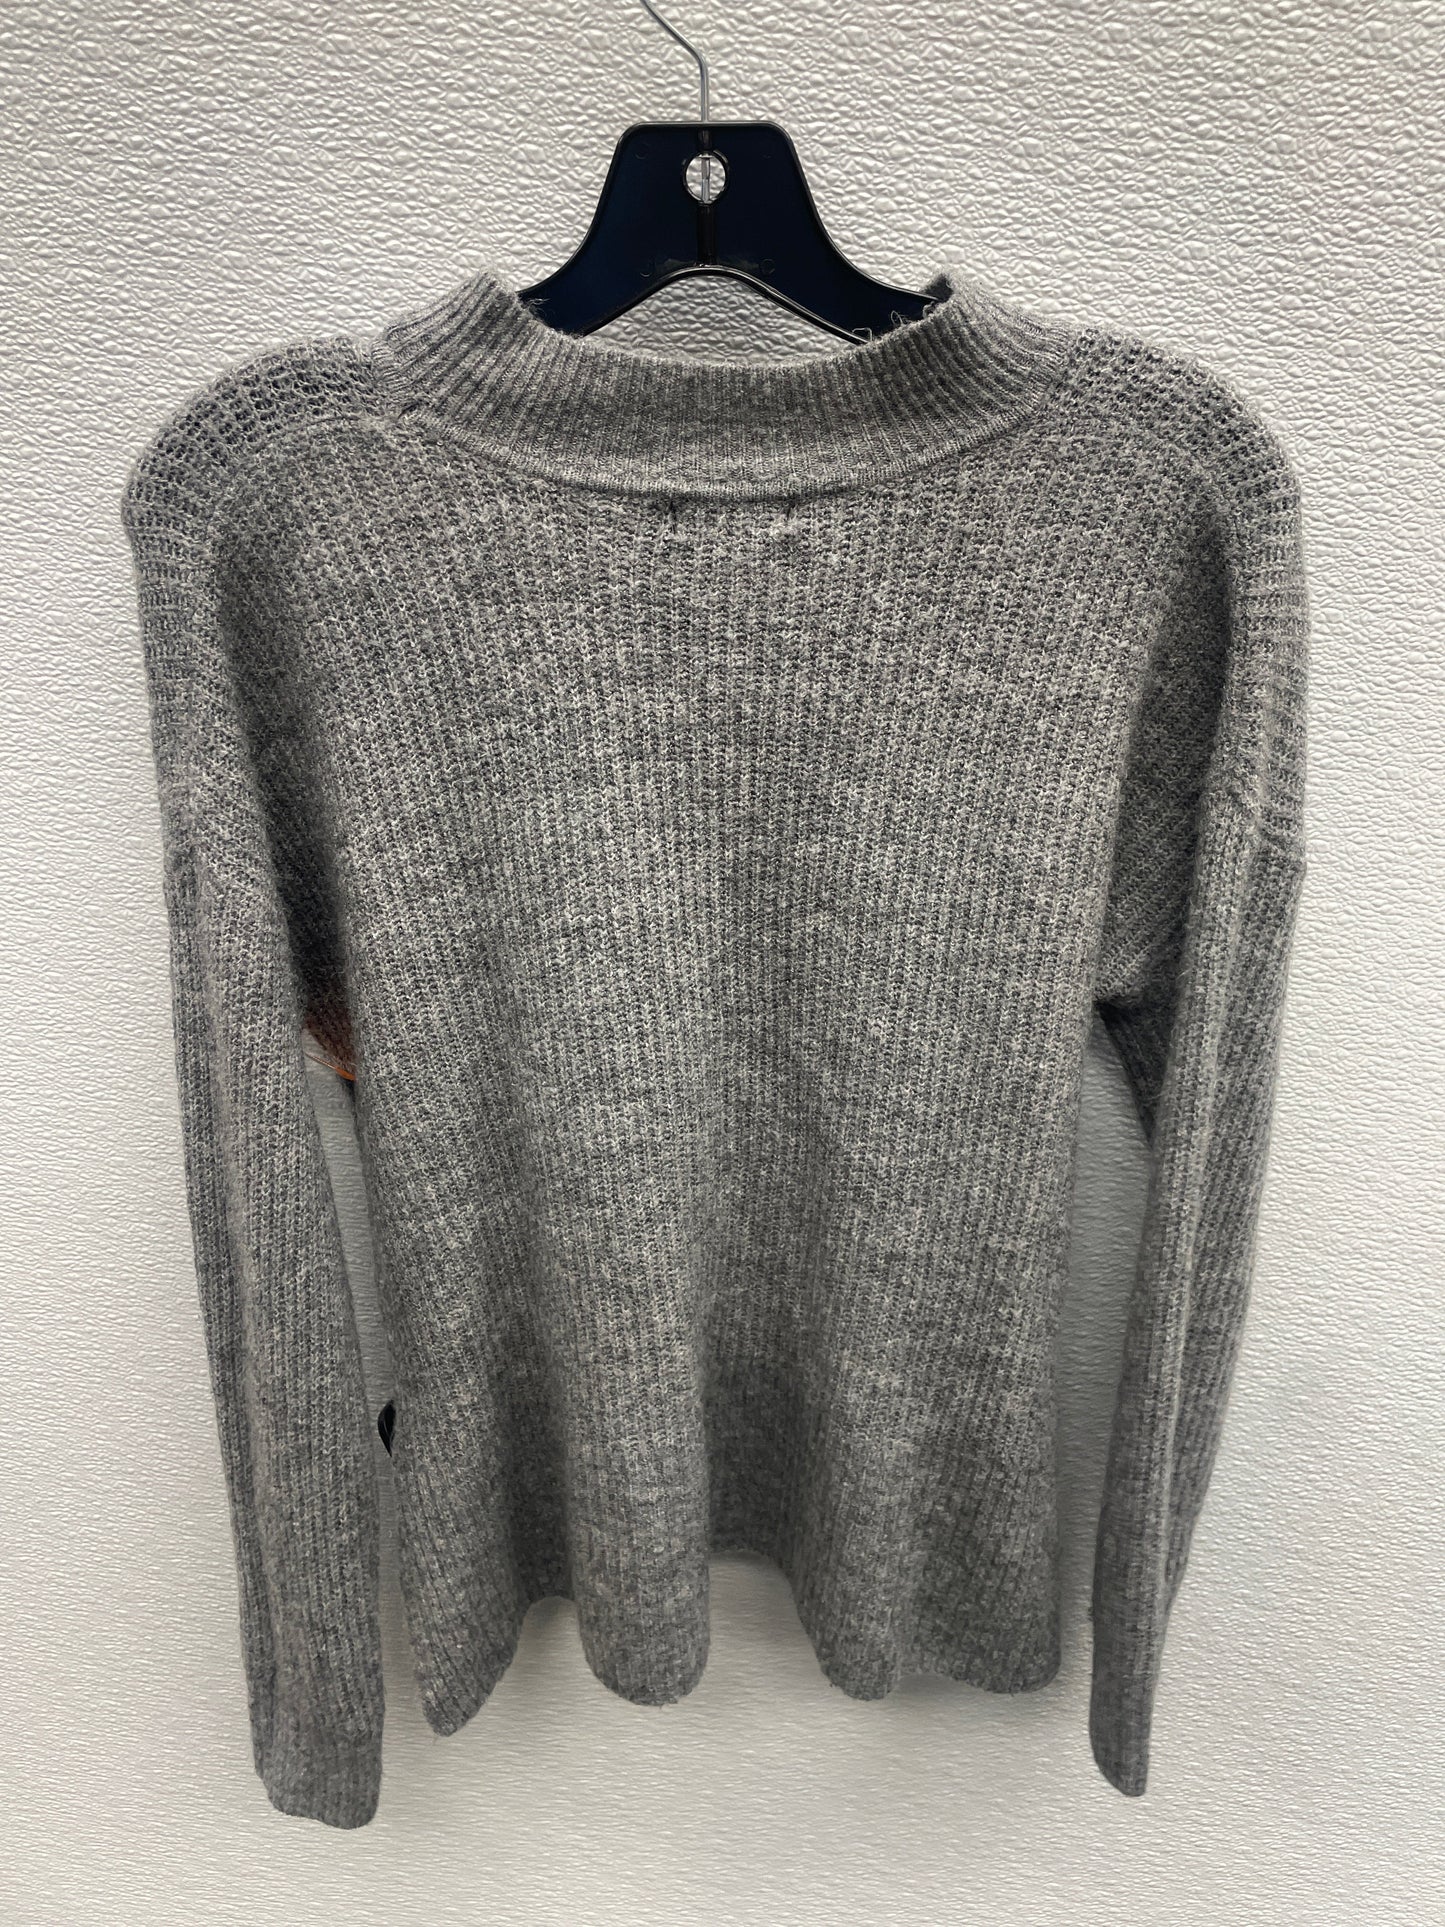 Sweater By Ambiance Apparel  Size: M